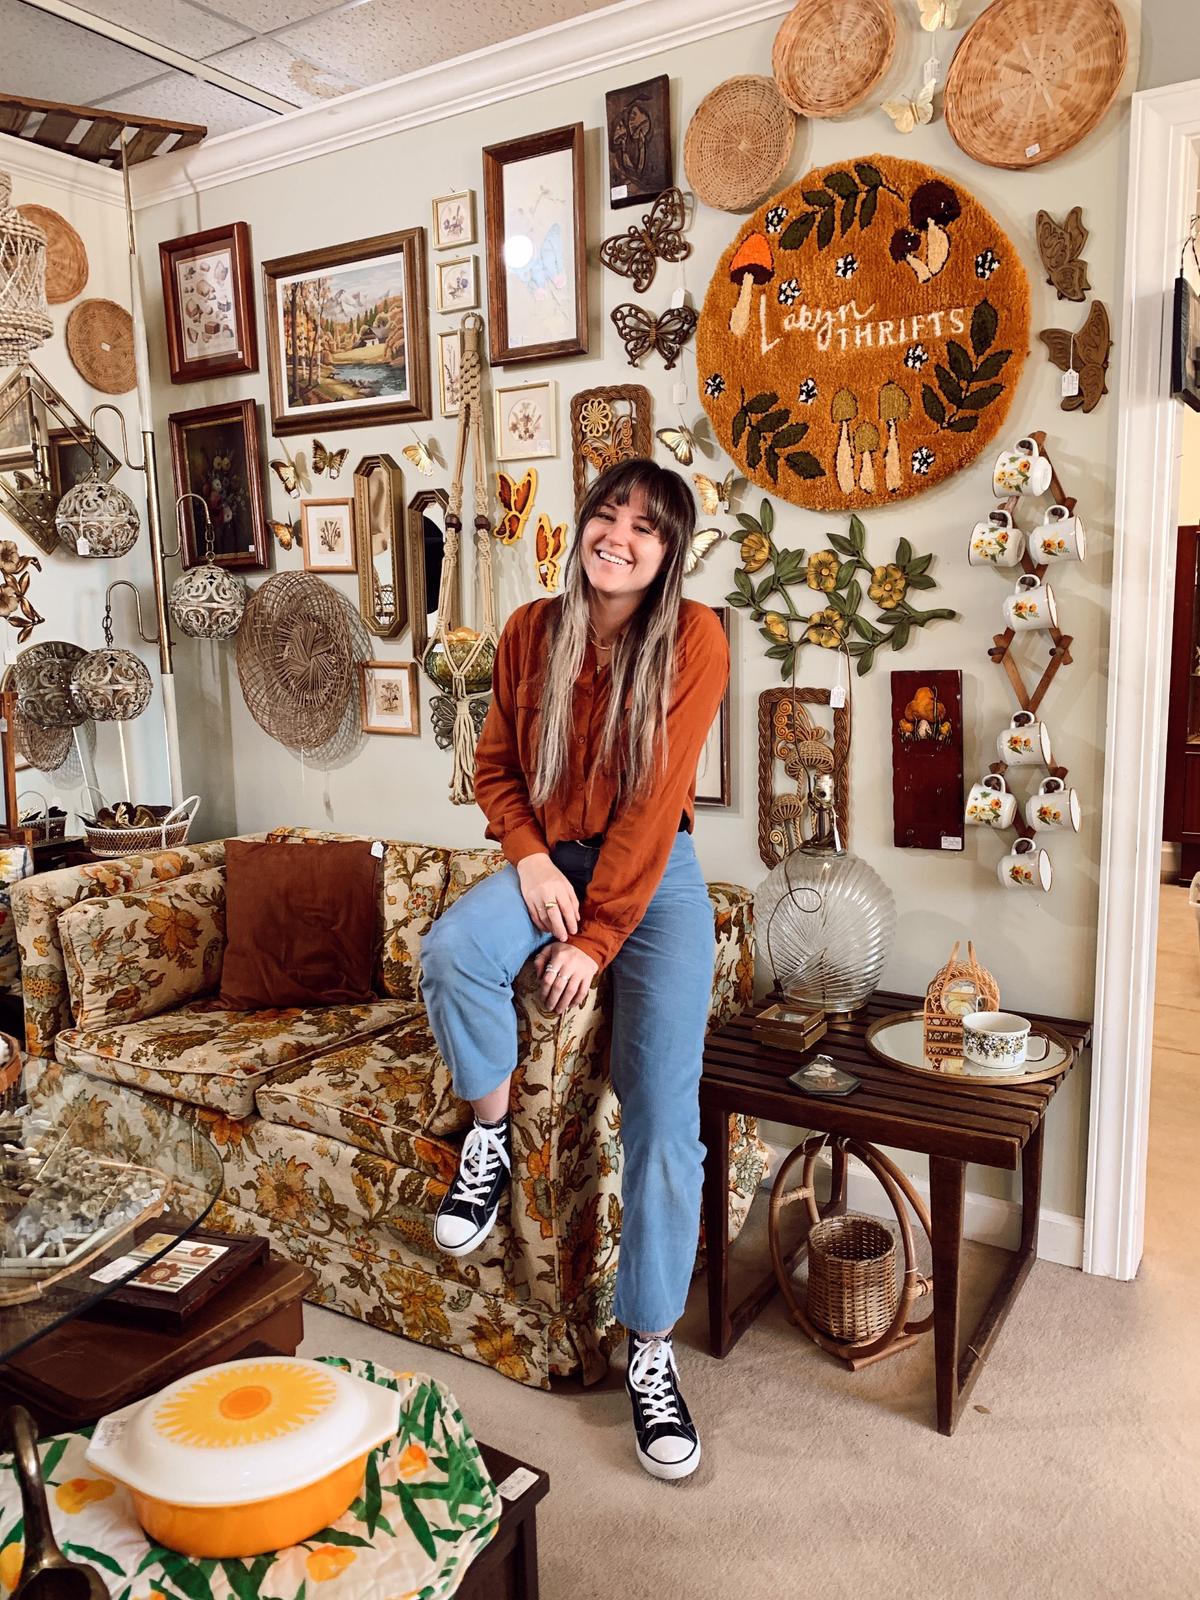 26-year-old Lakyn Bowman is a ceramic artist and vintage shop owner. (Courtesy of <a href="https://www.lakynthrifts.com/">Lakyn Bowman</a>)